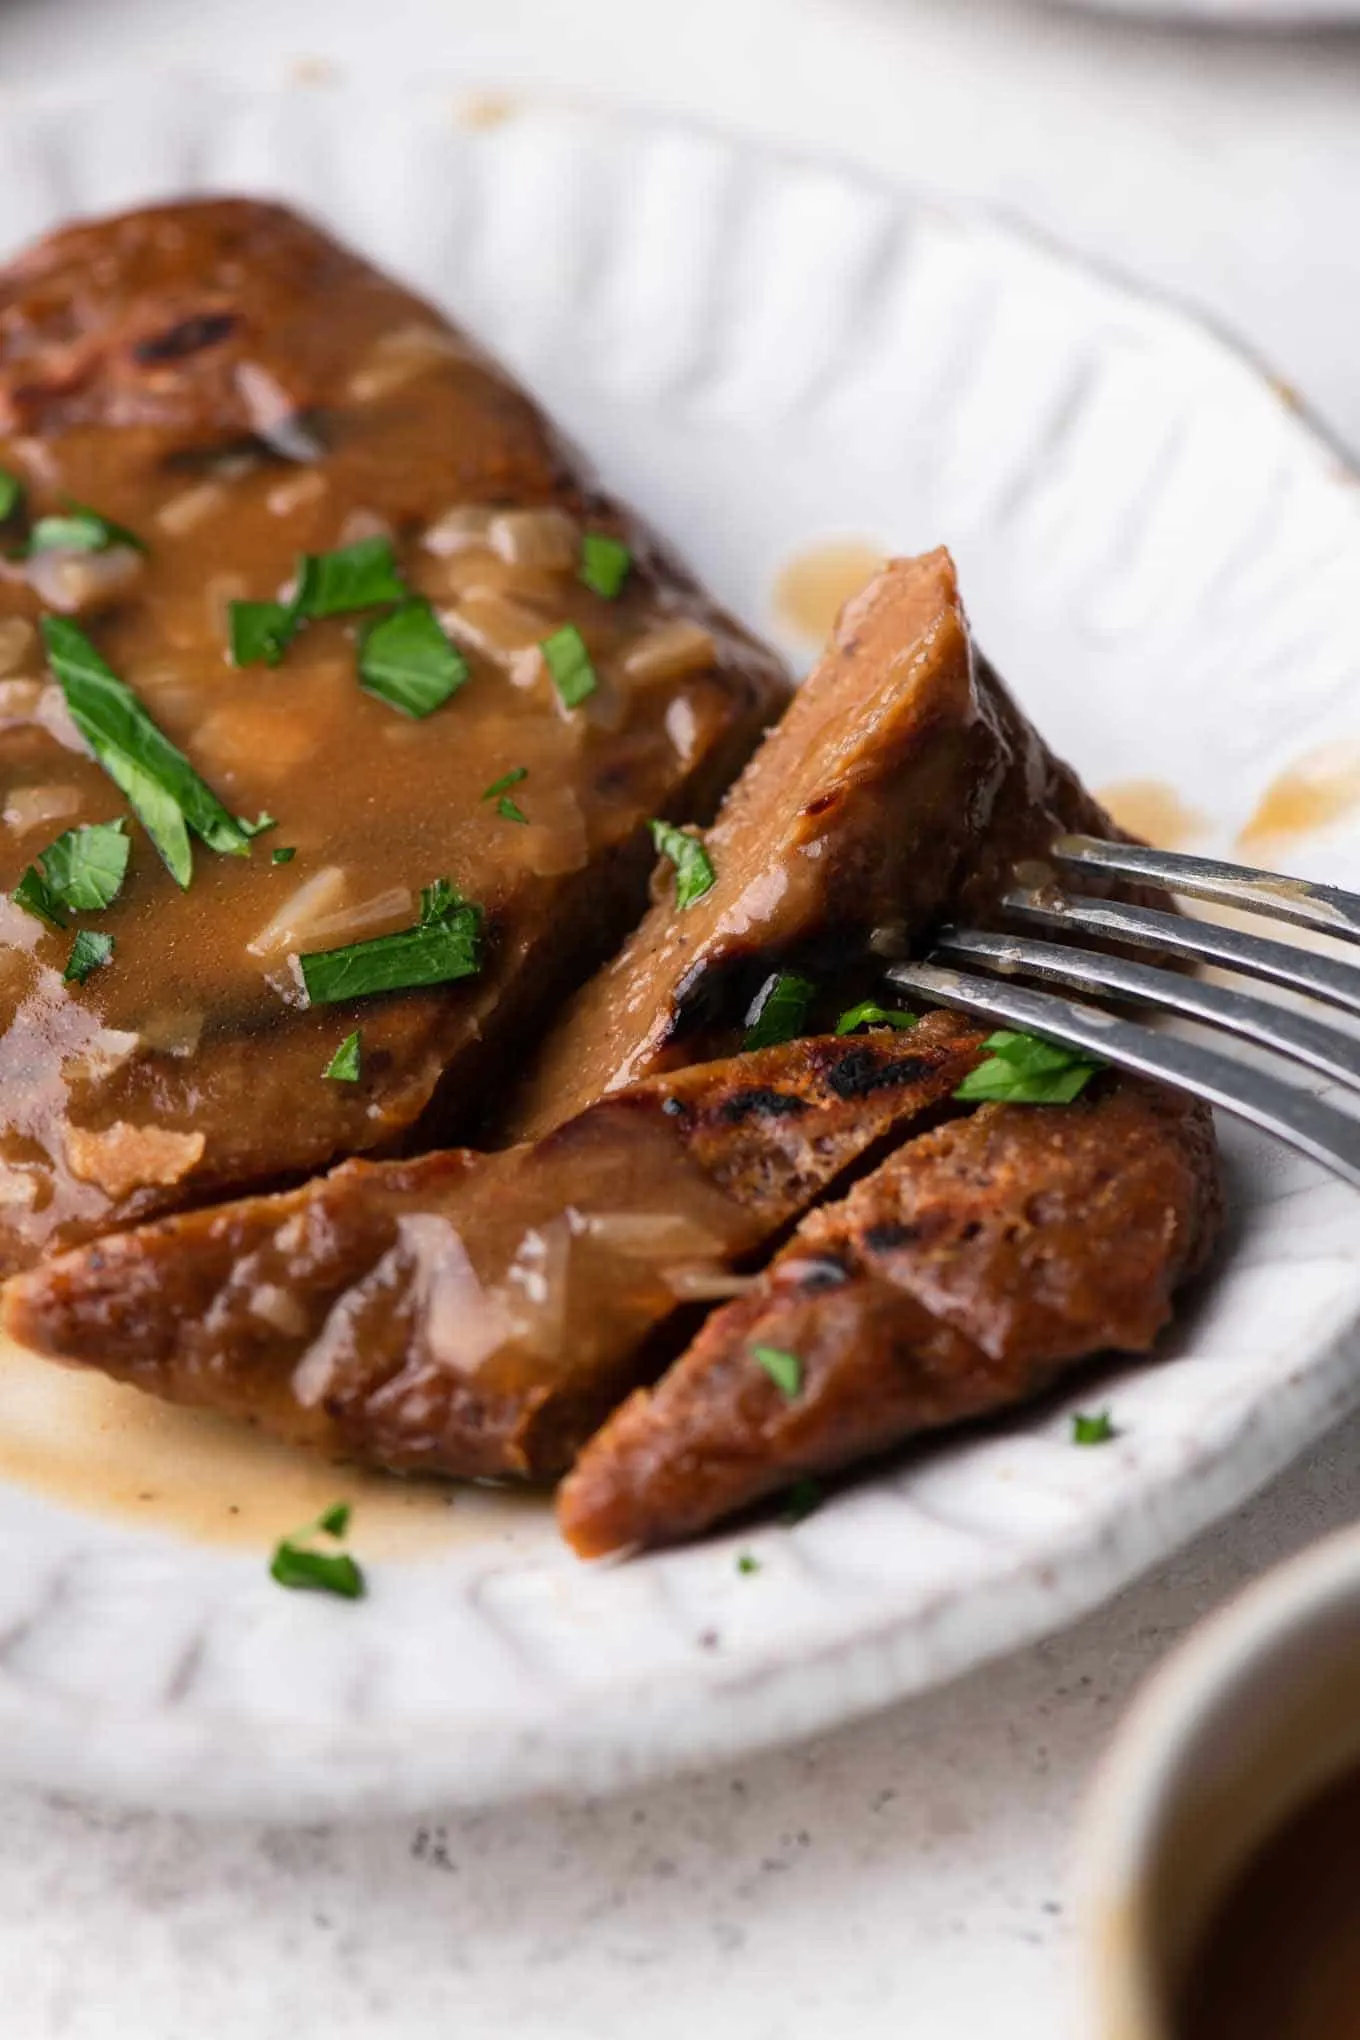 seitan steak topped with gravy and parsley with some bites cut and one on a fork